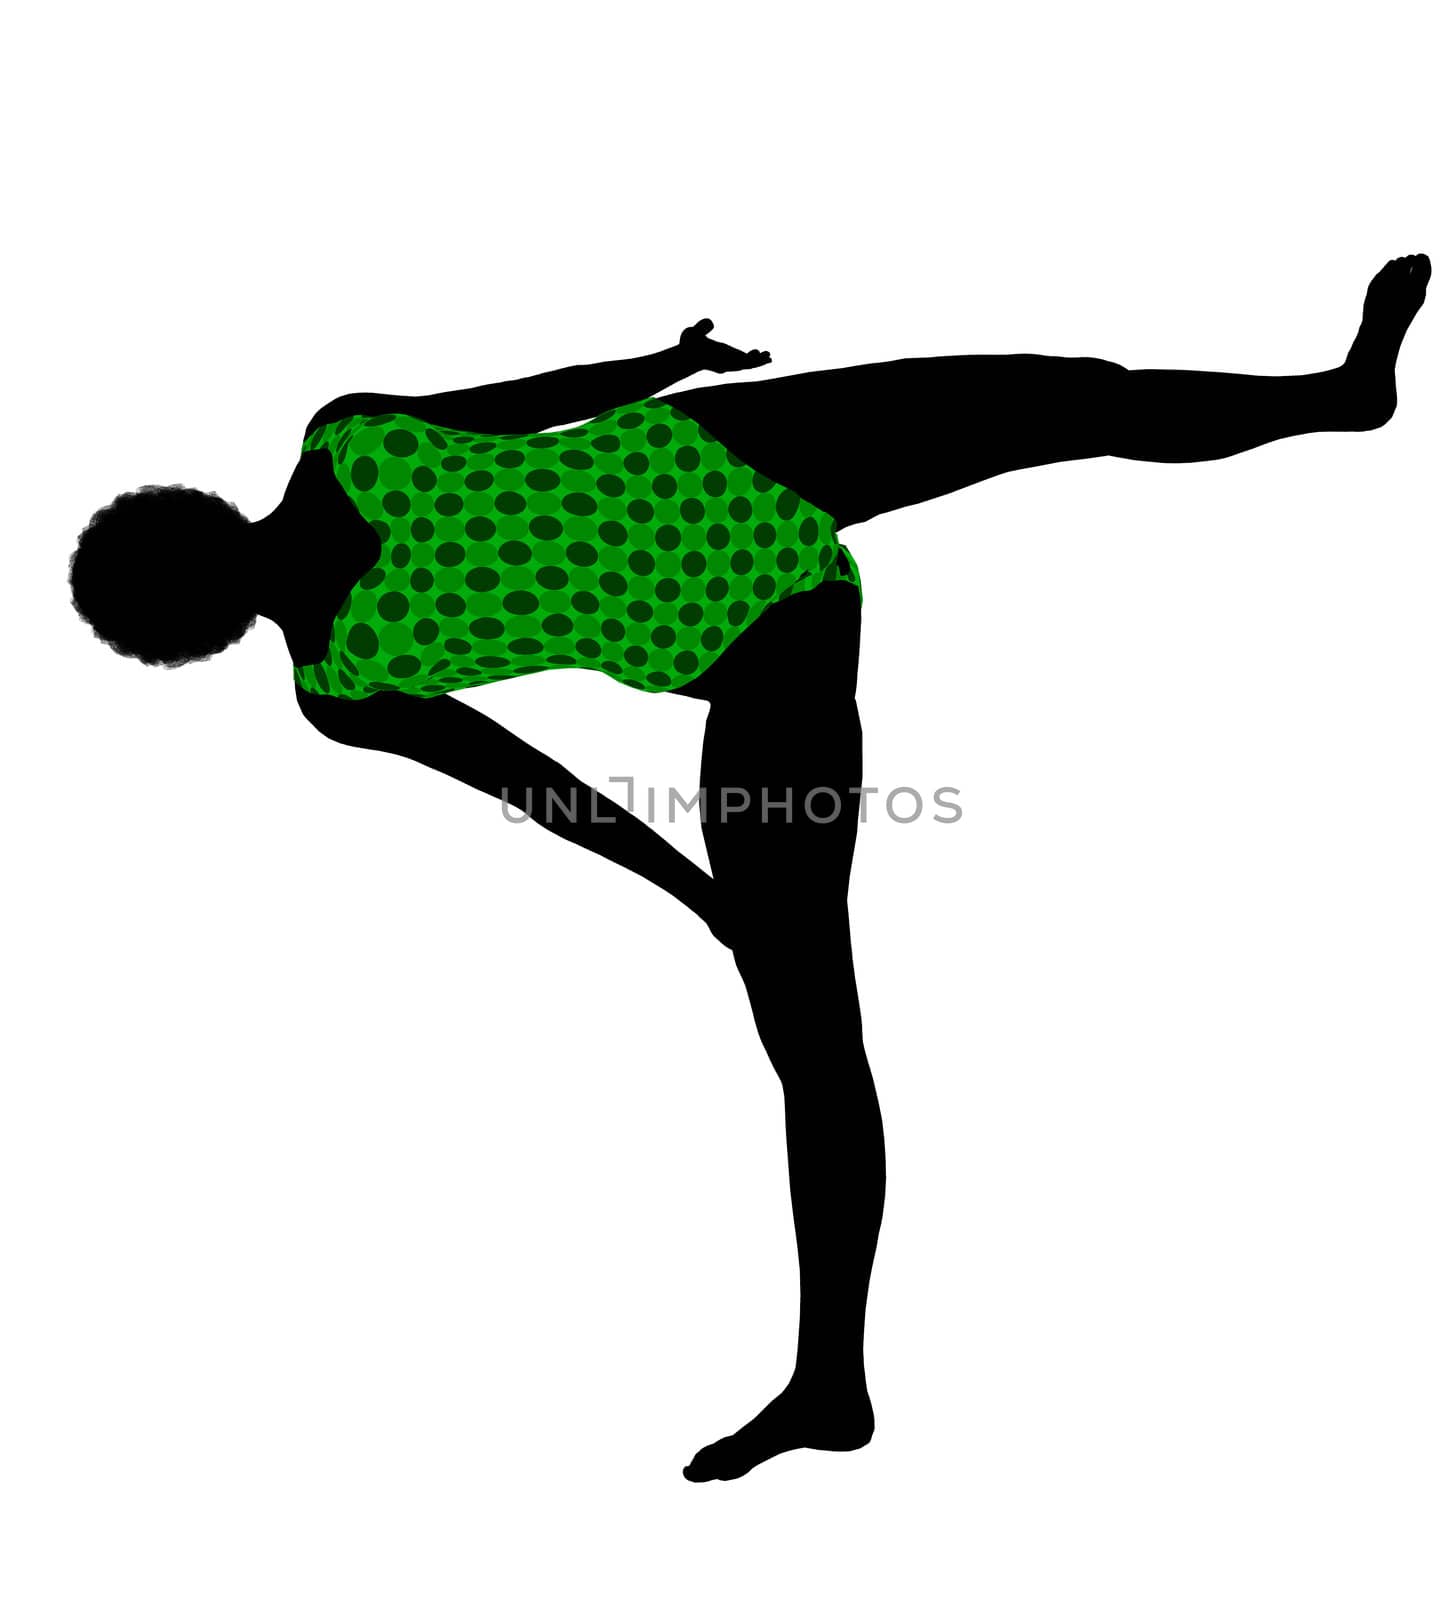 Female African American Yoga Illustration Silhouette by kathygold